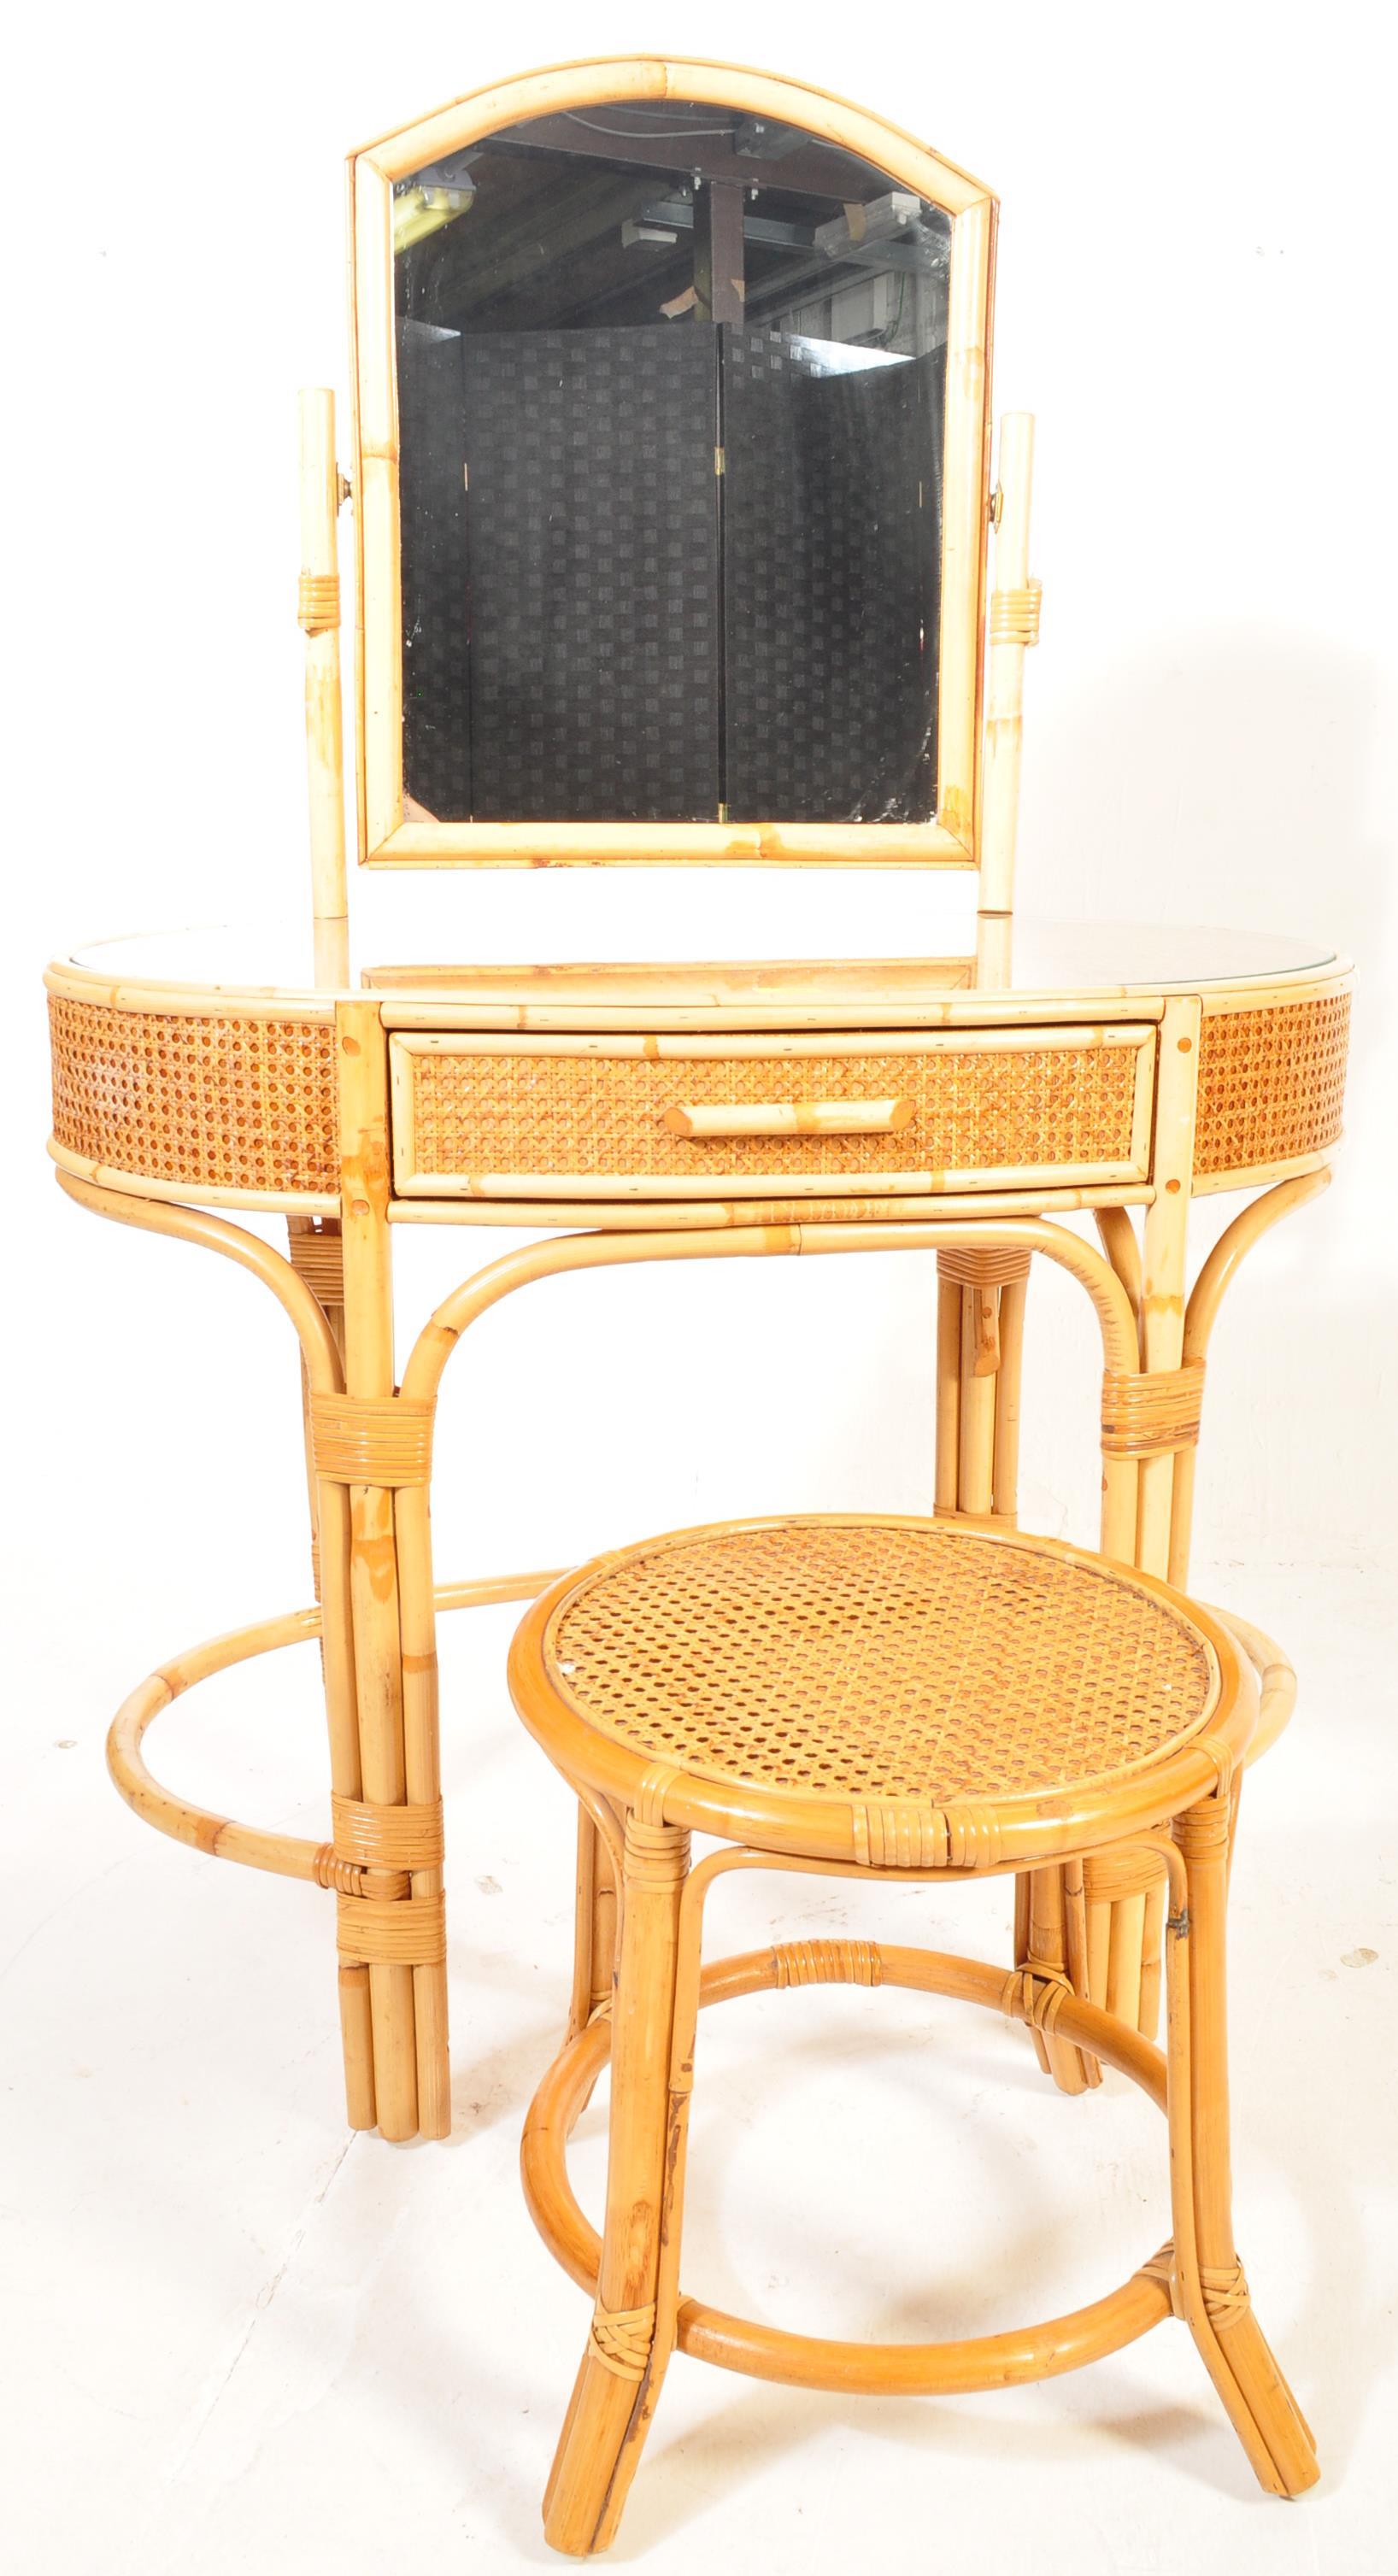 VINTAGE MID 20TH CENTURY 1960S BAMBOO DRESSING TABLE - Image 4 of 5